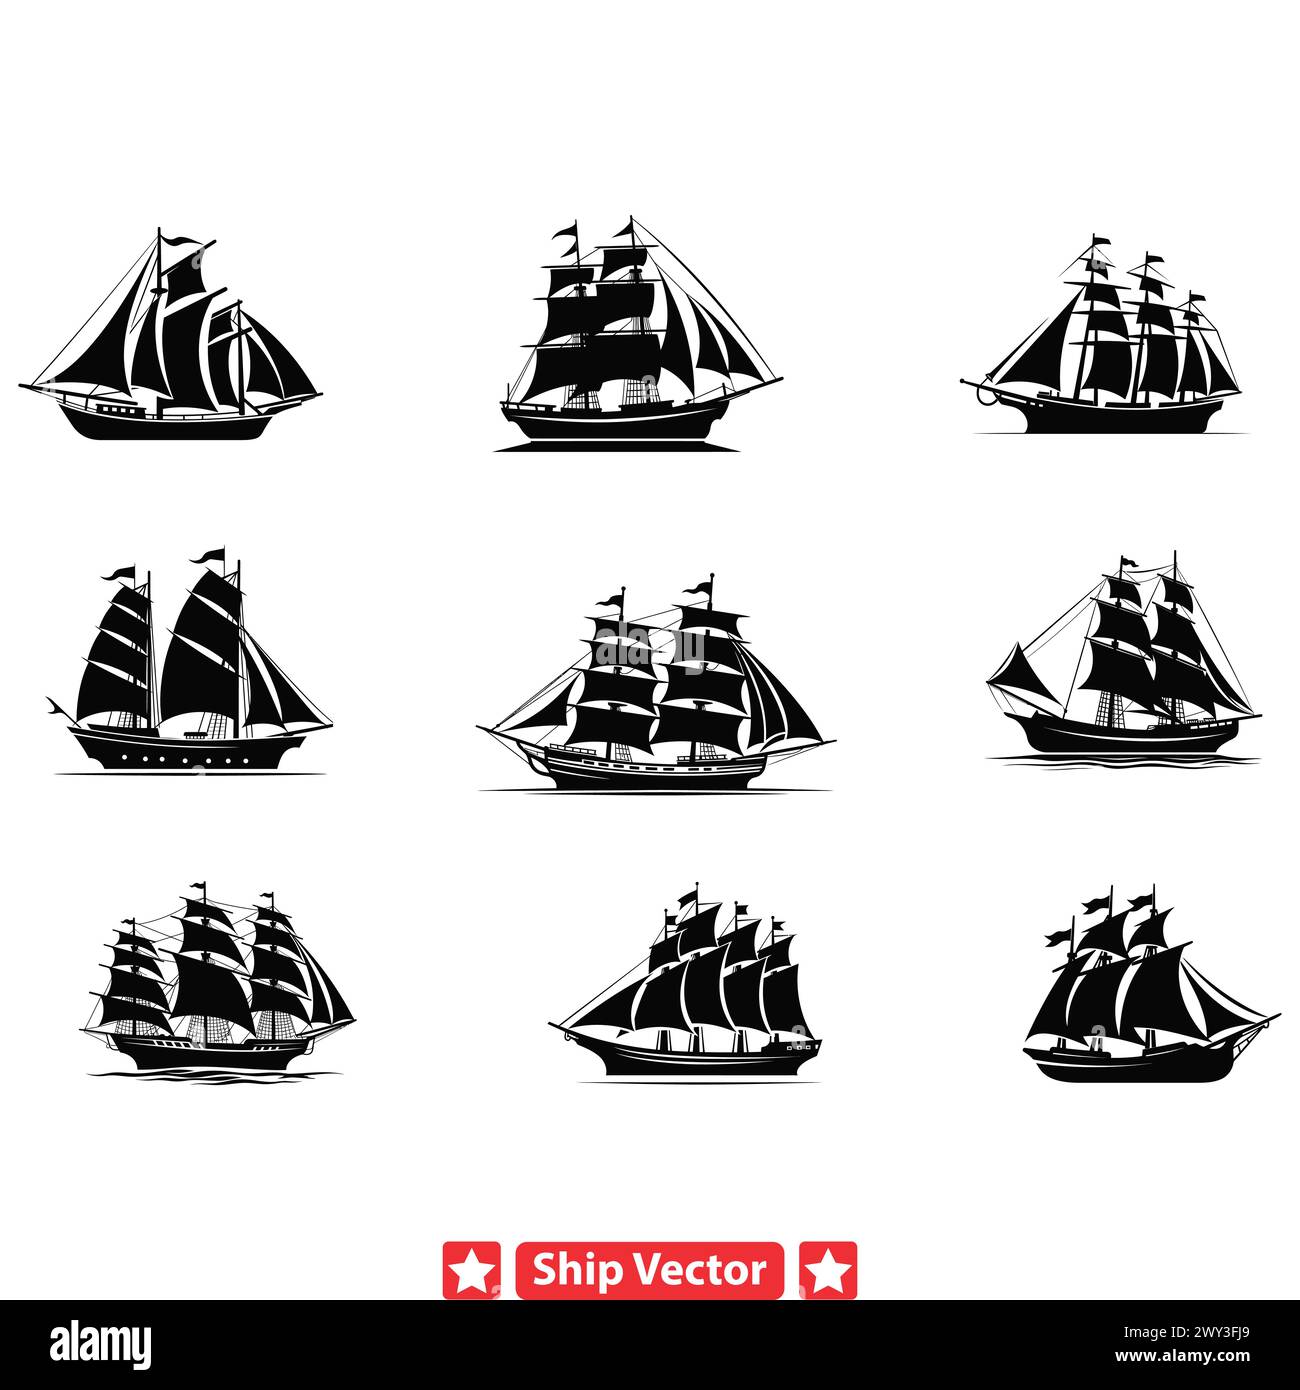 Sunset Regatta  Dynamic Ship Silhouettes Illuminated by the Golden Glow of Dusk Stock Vector